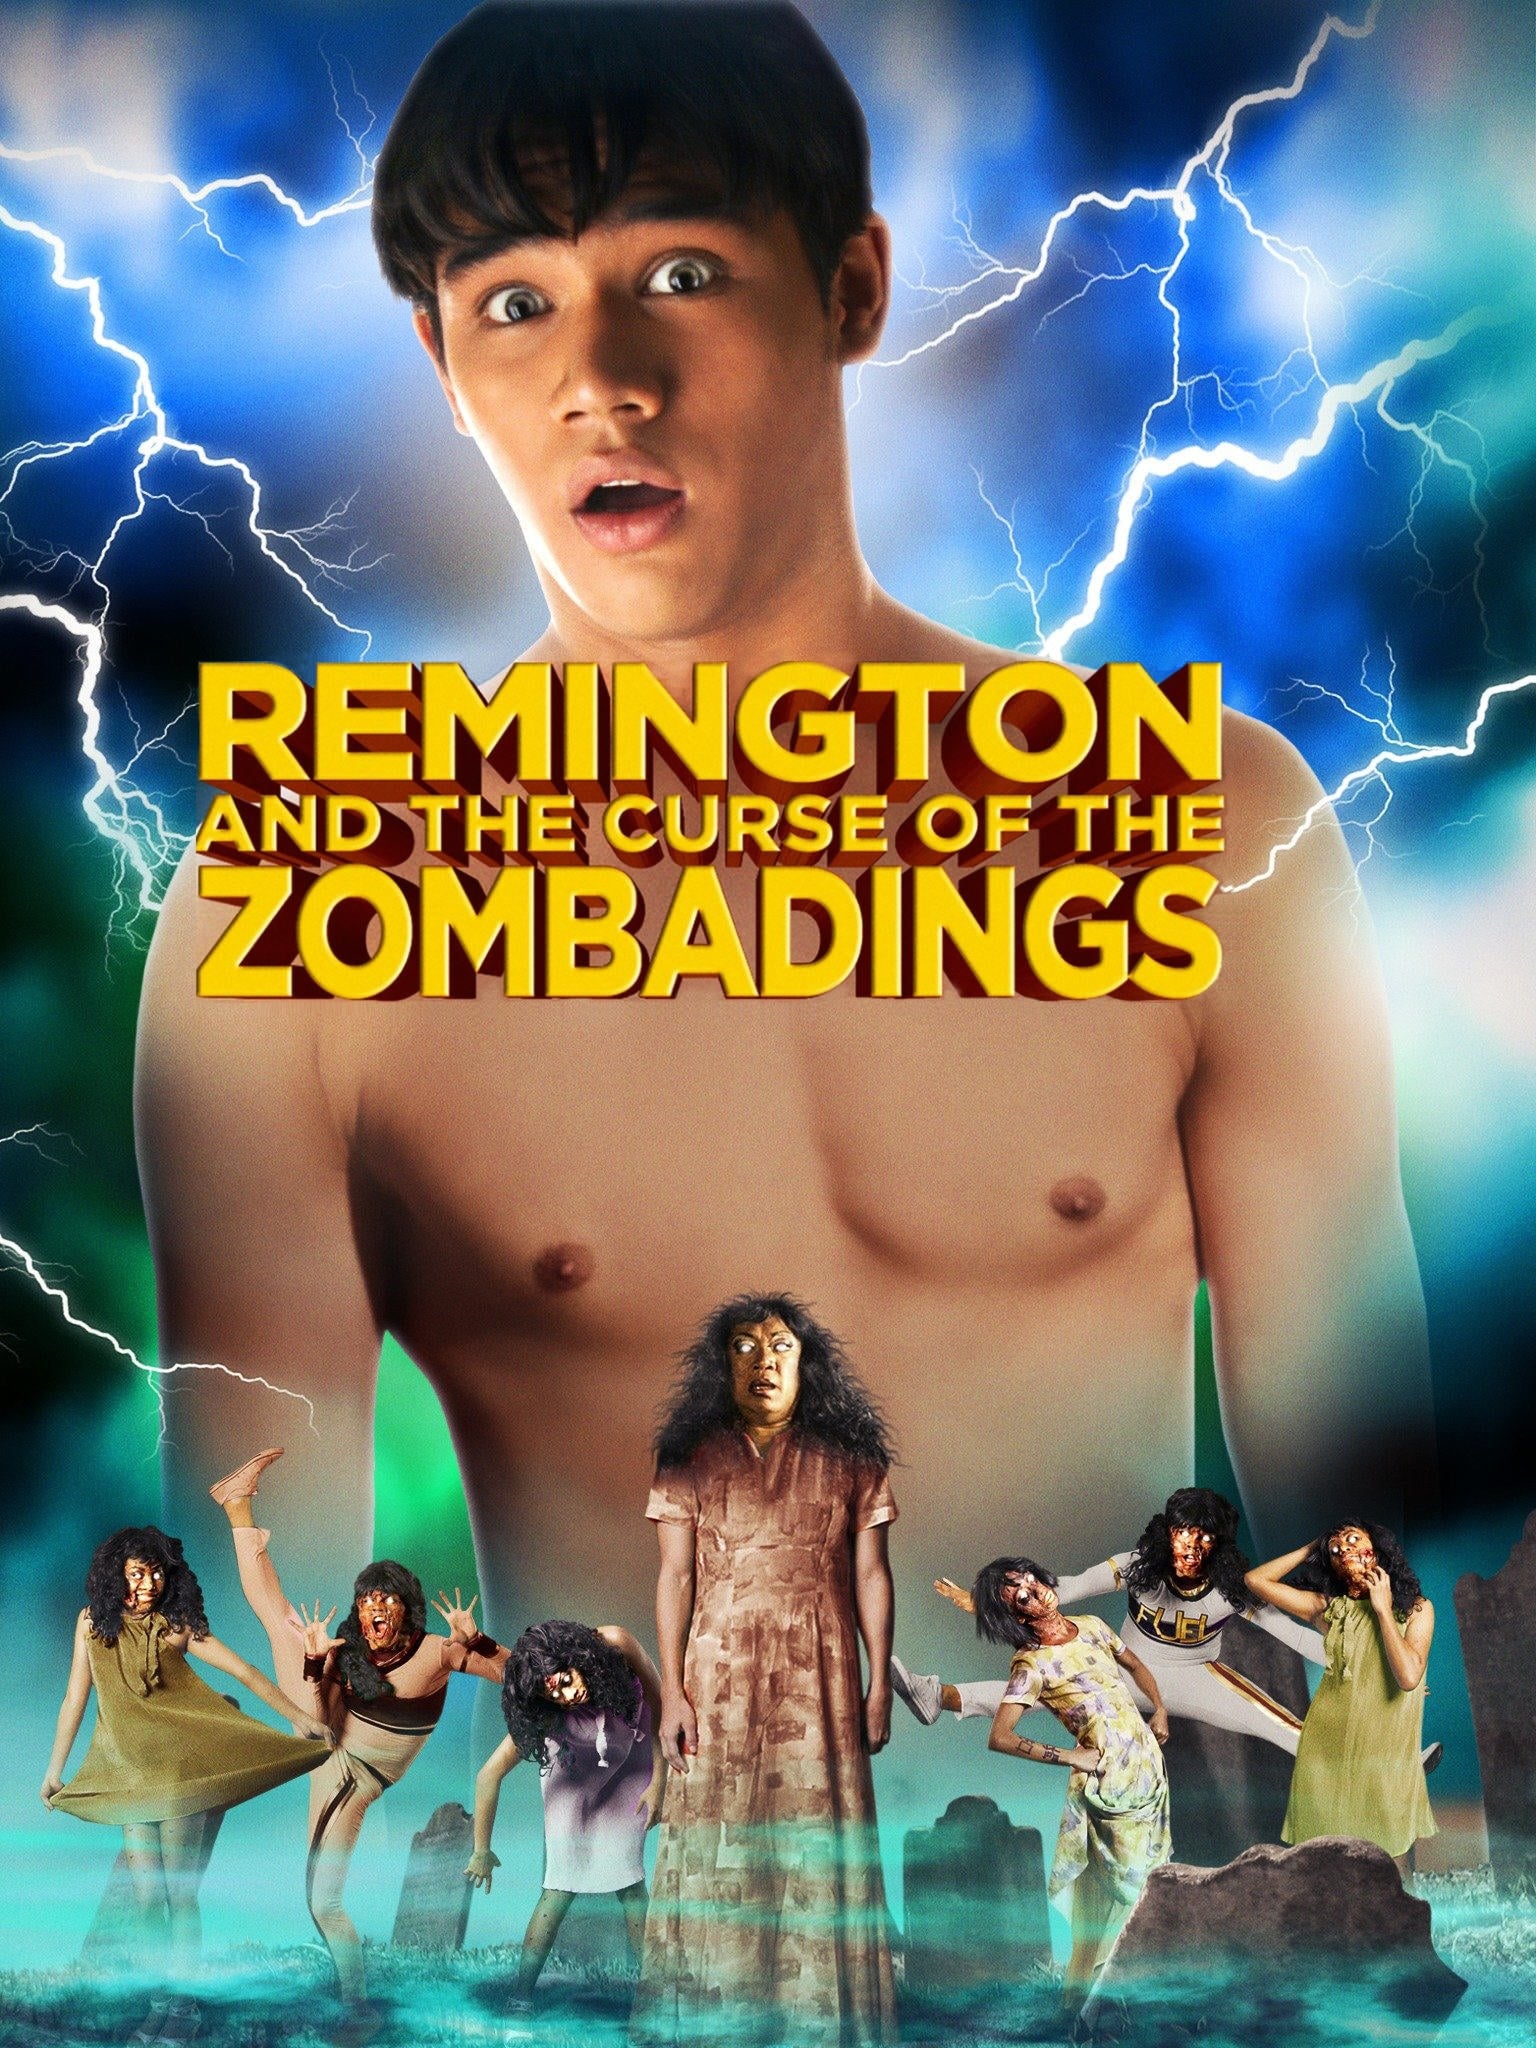 Remington and the Curse of the Zombadings (2011)